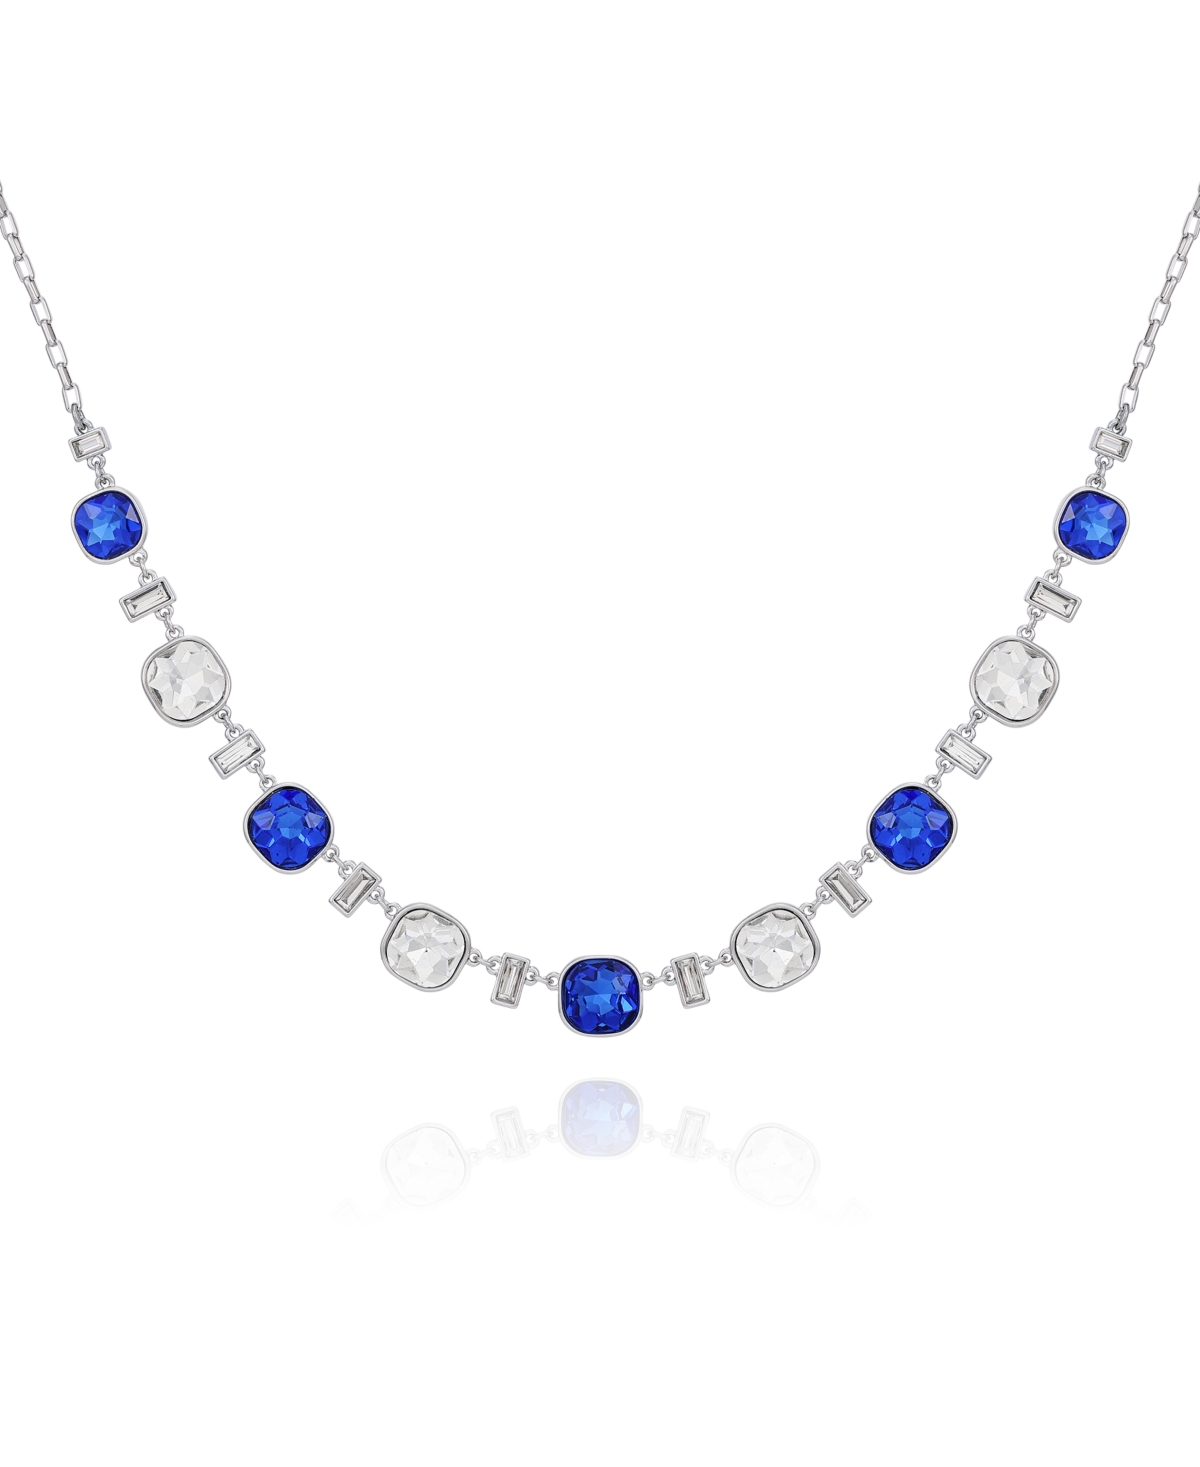 T Tahari Silver-tone Blue And Clear Glass Stone Statement Necklace, 18" + 3" Extender